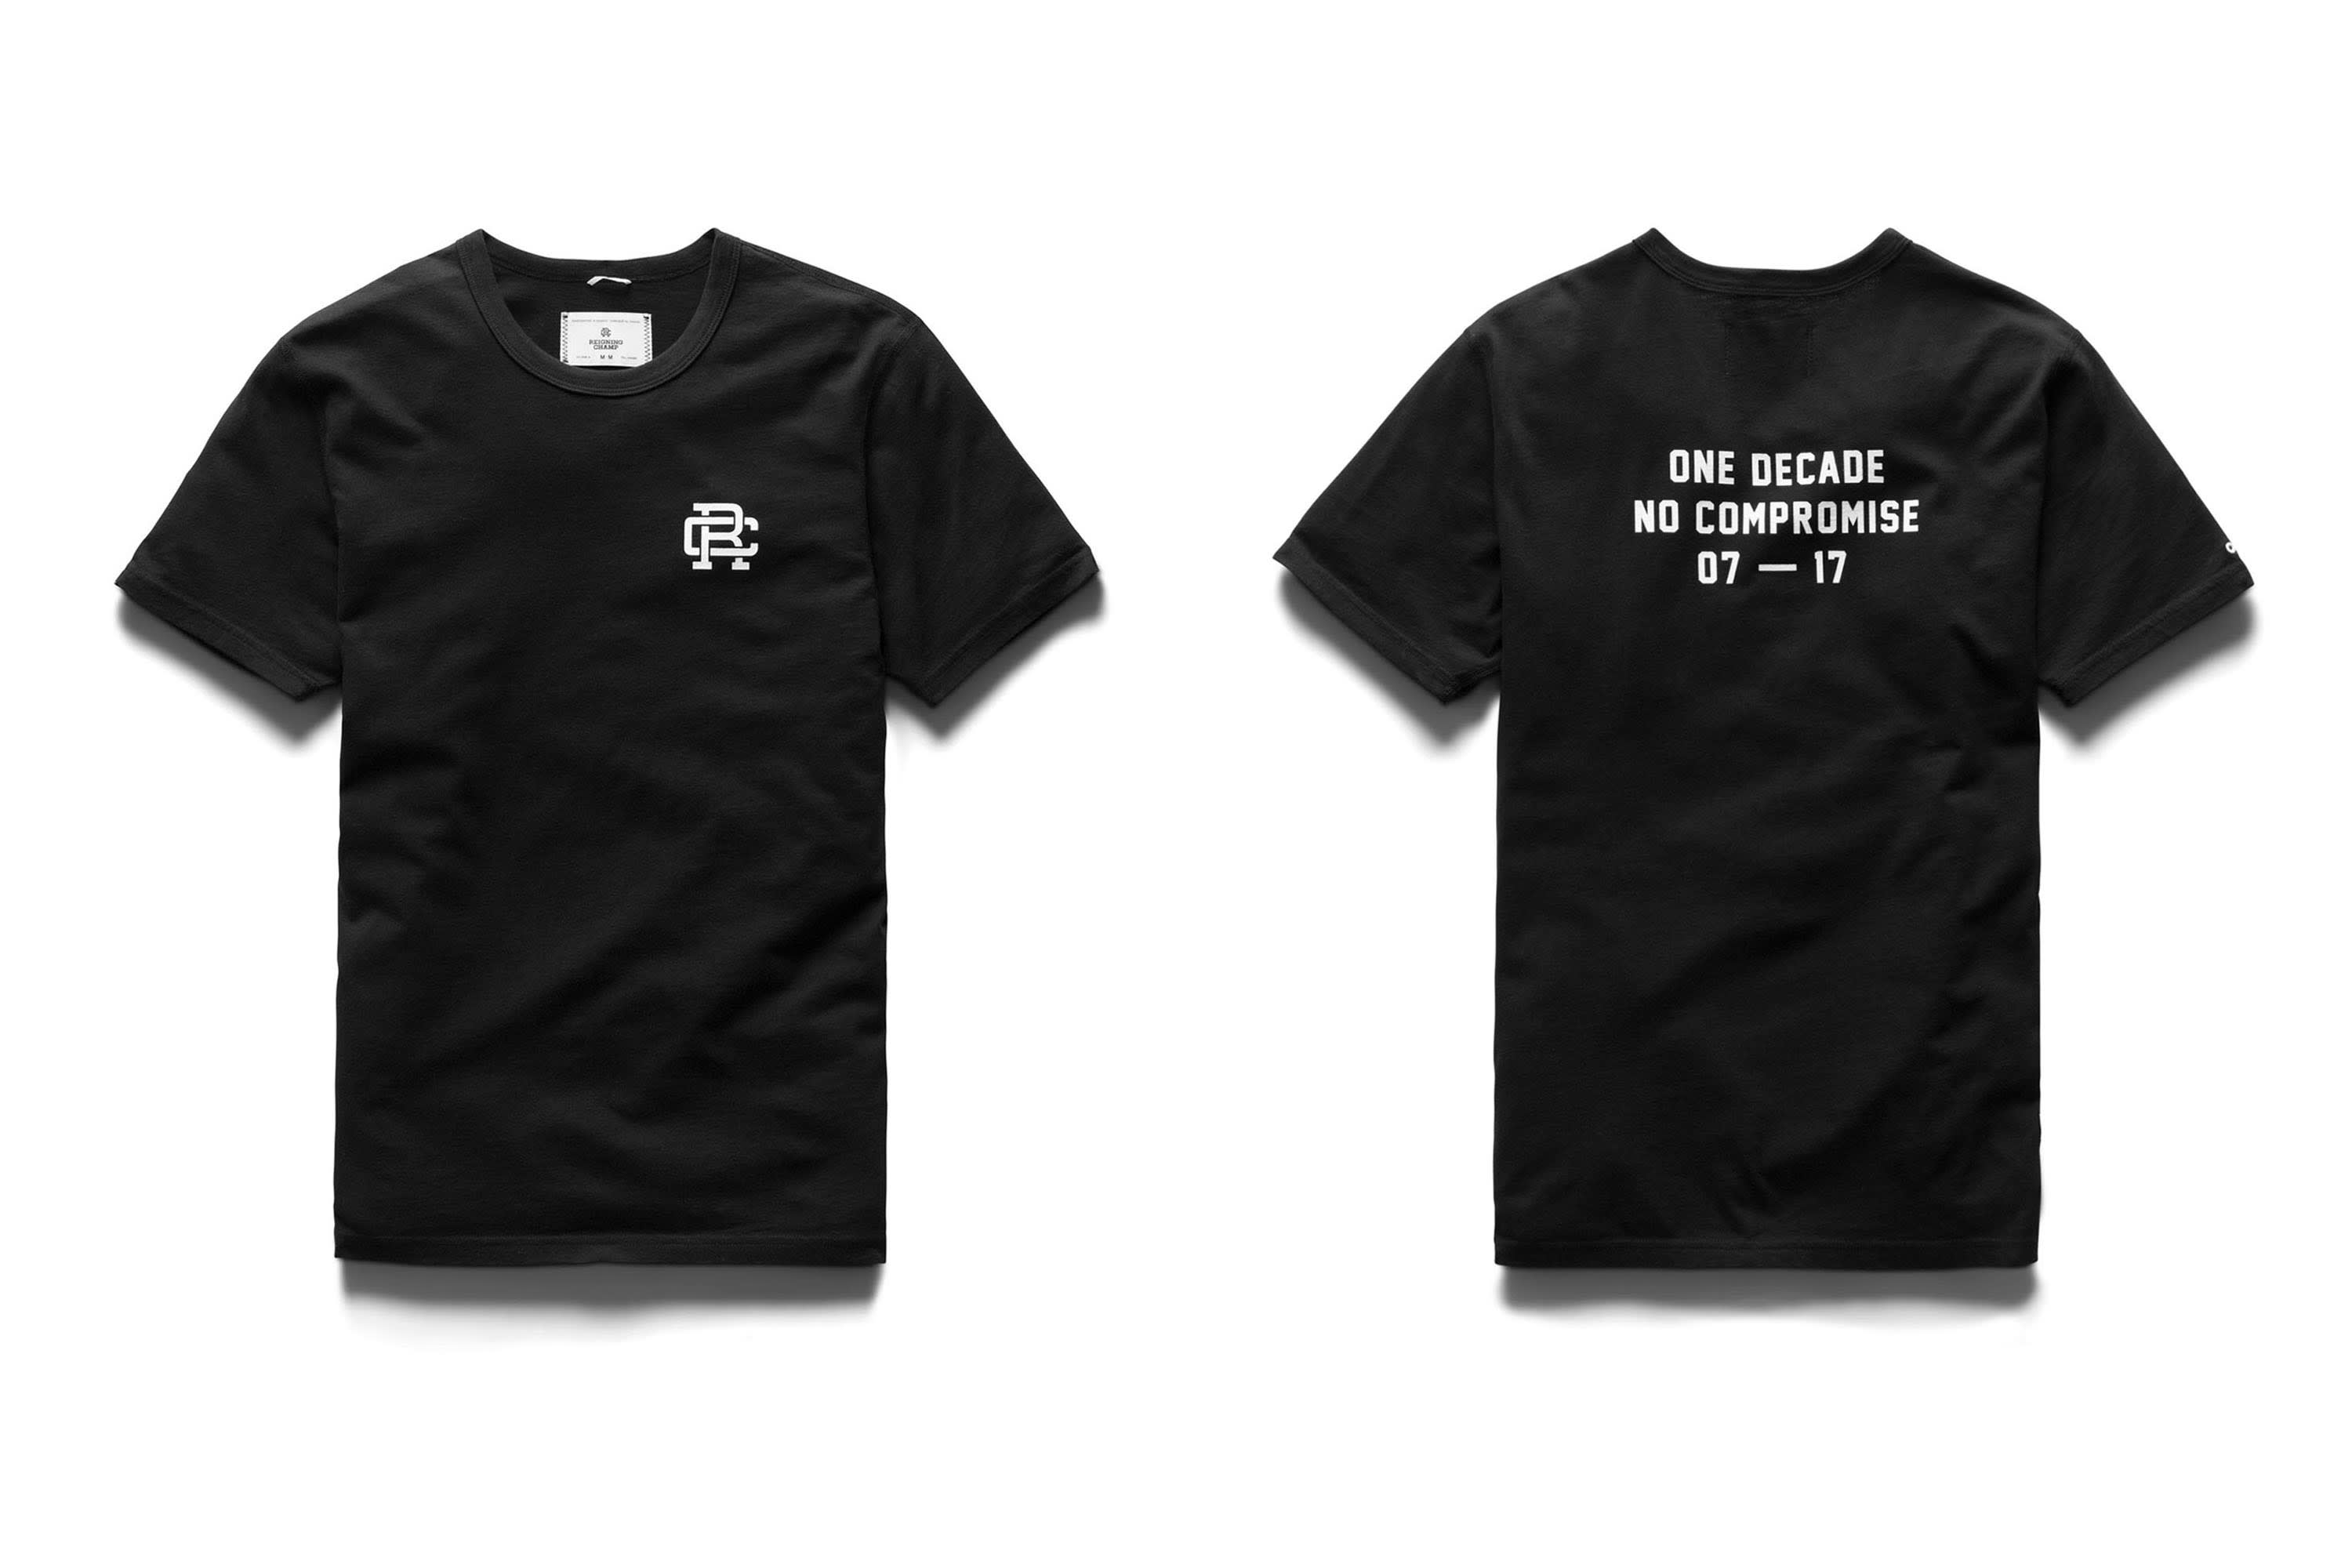 Reigning Champ Celebrates 10 Year Anniversary With Limited Edition Collection